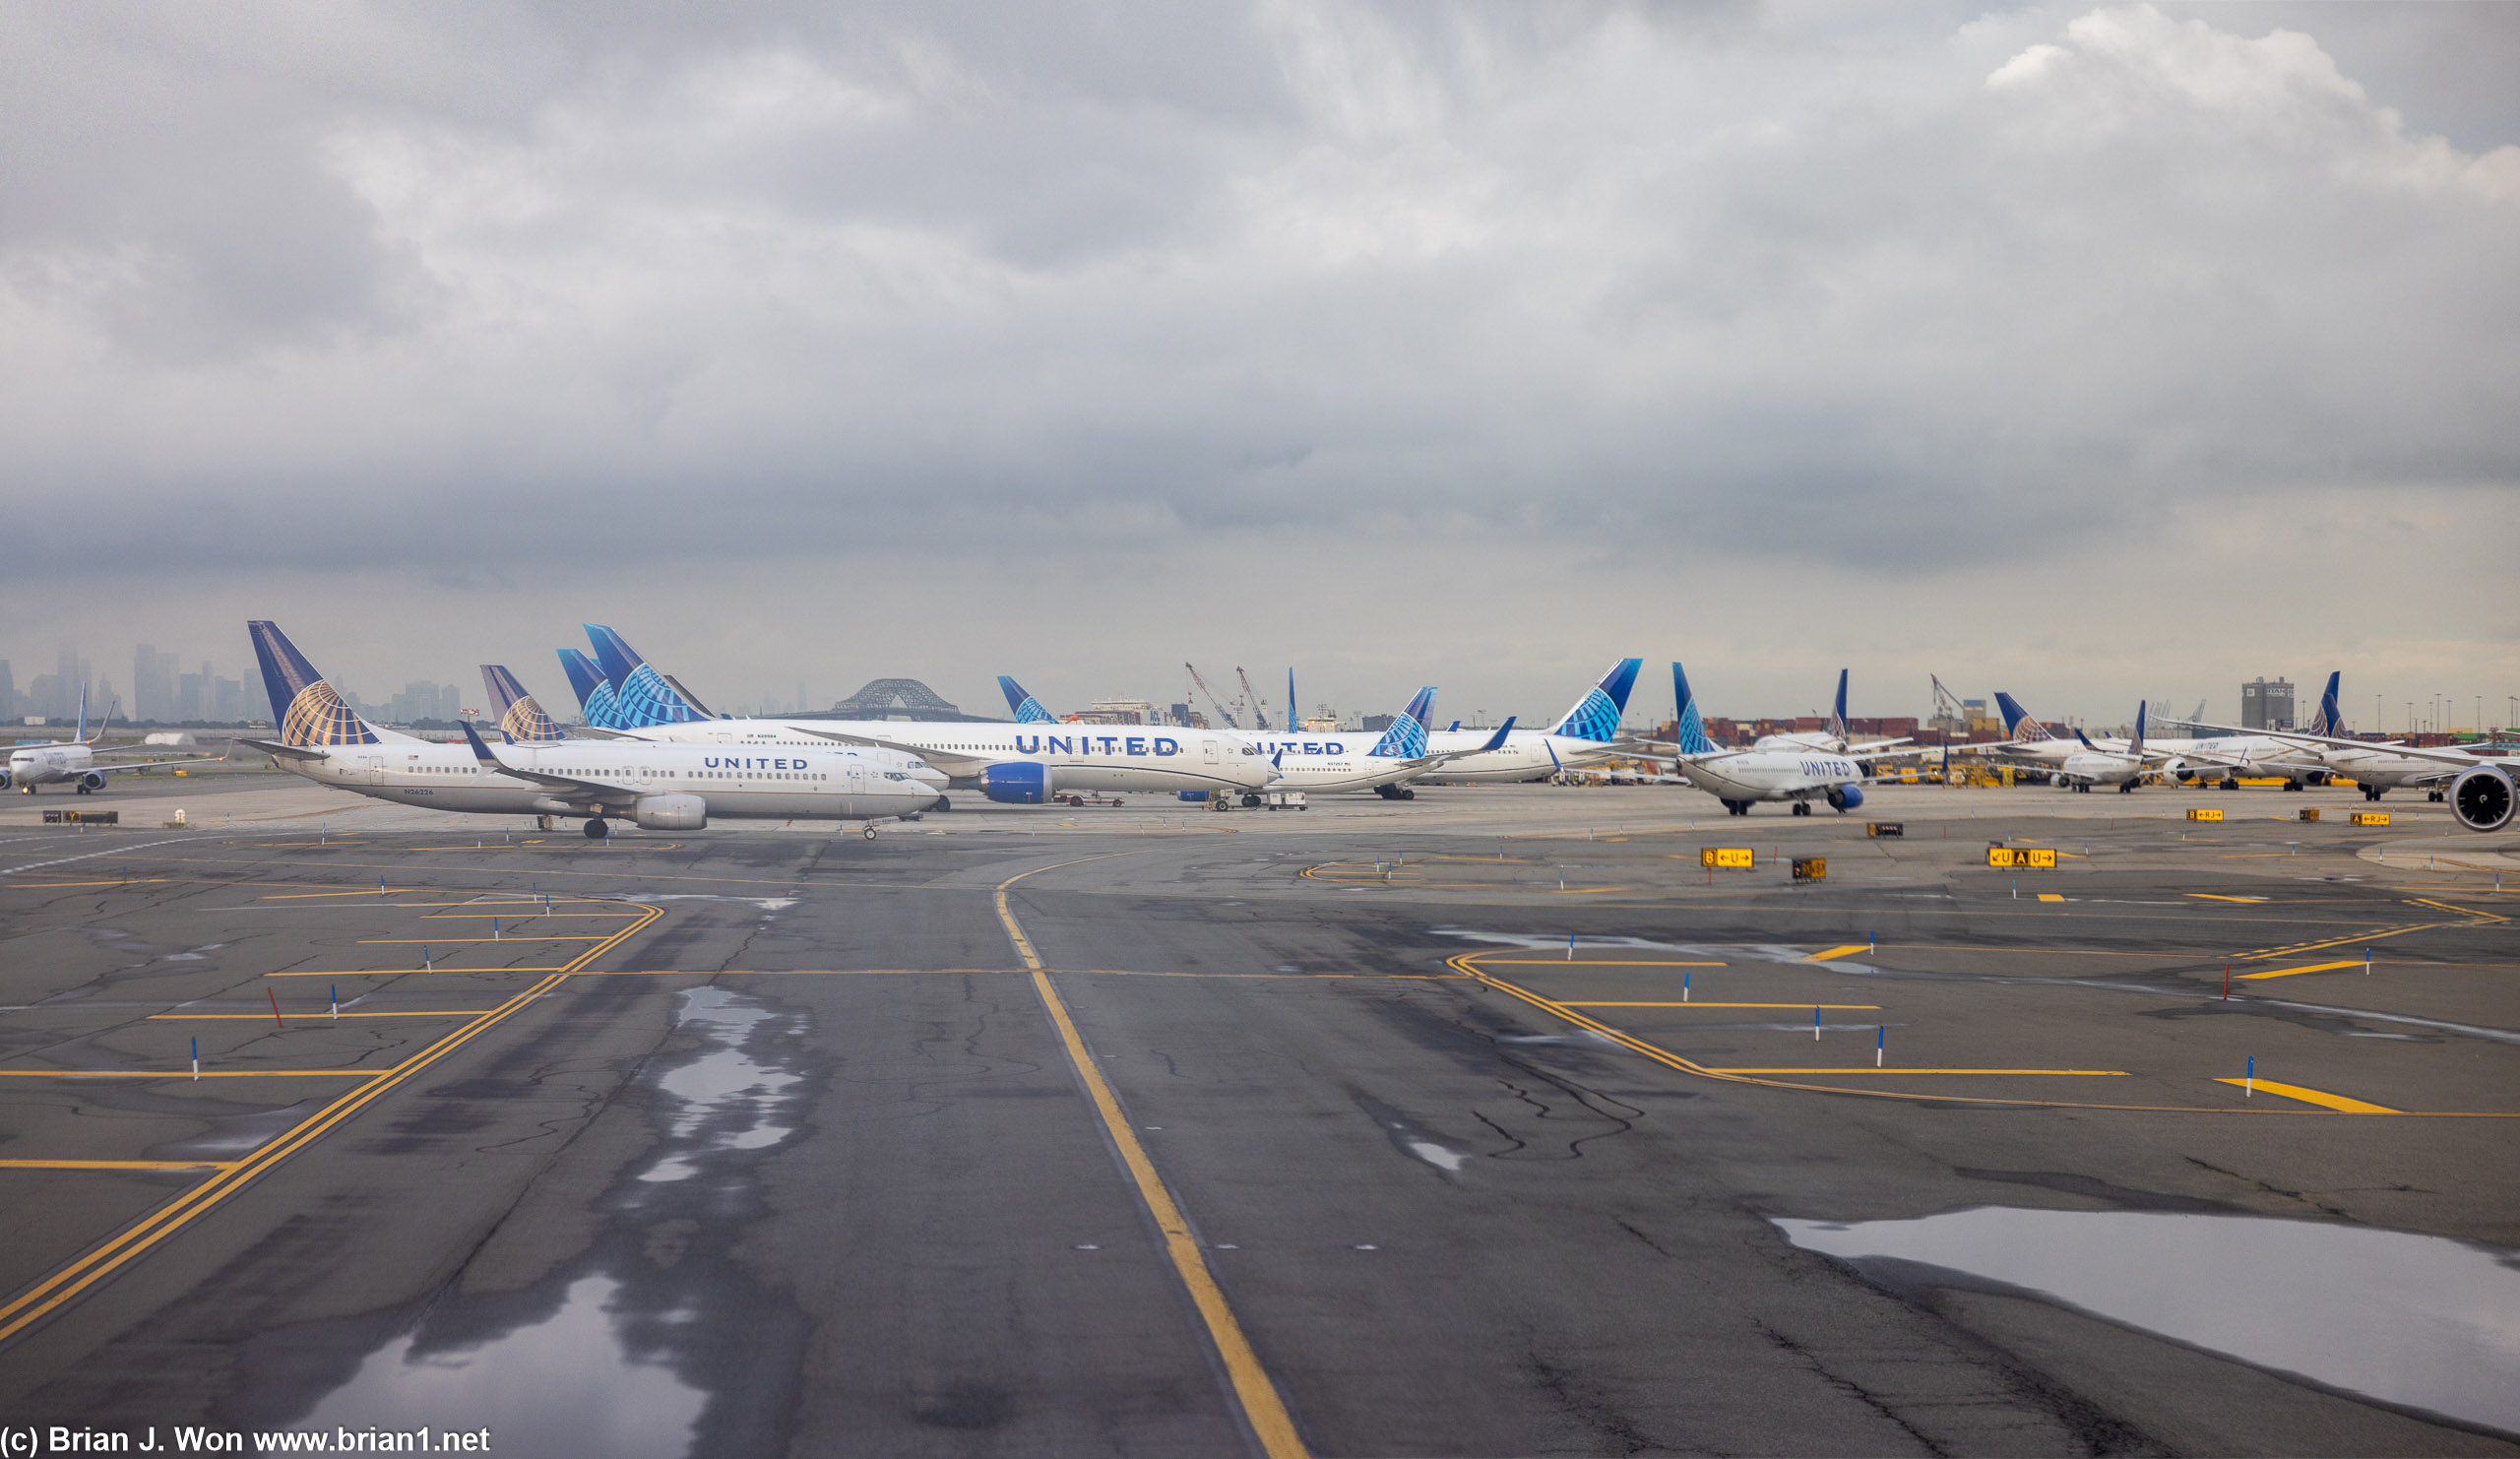 There's a lot of airplanes on the ground at Newark Airport.